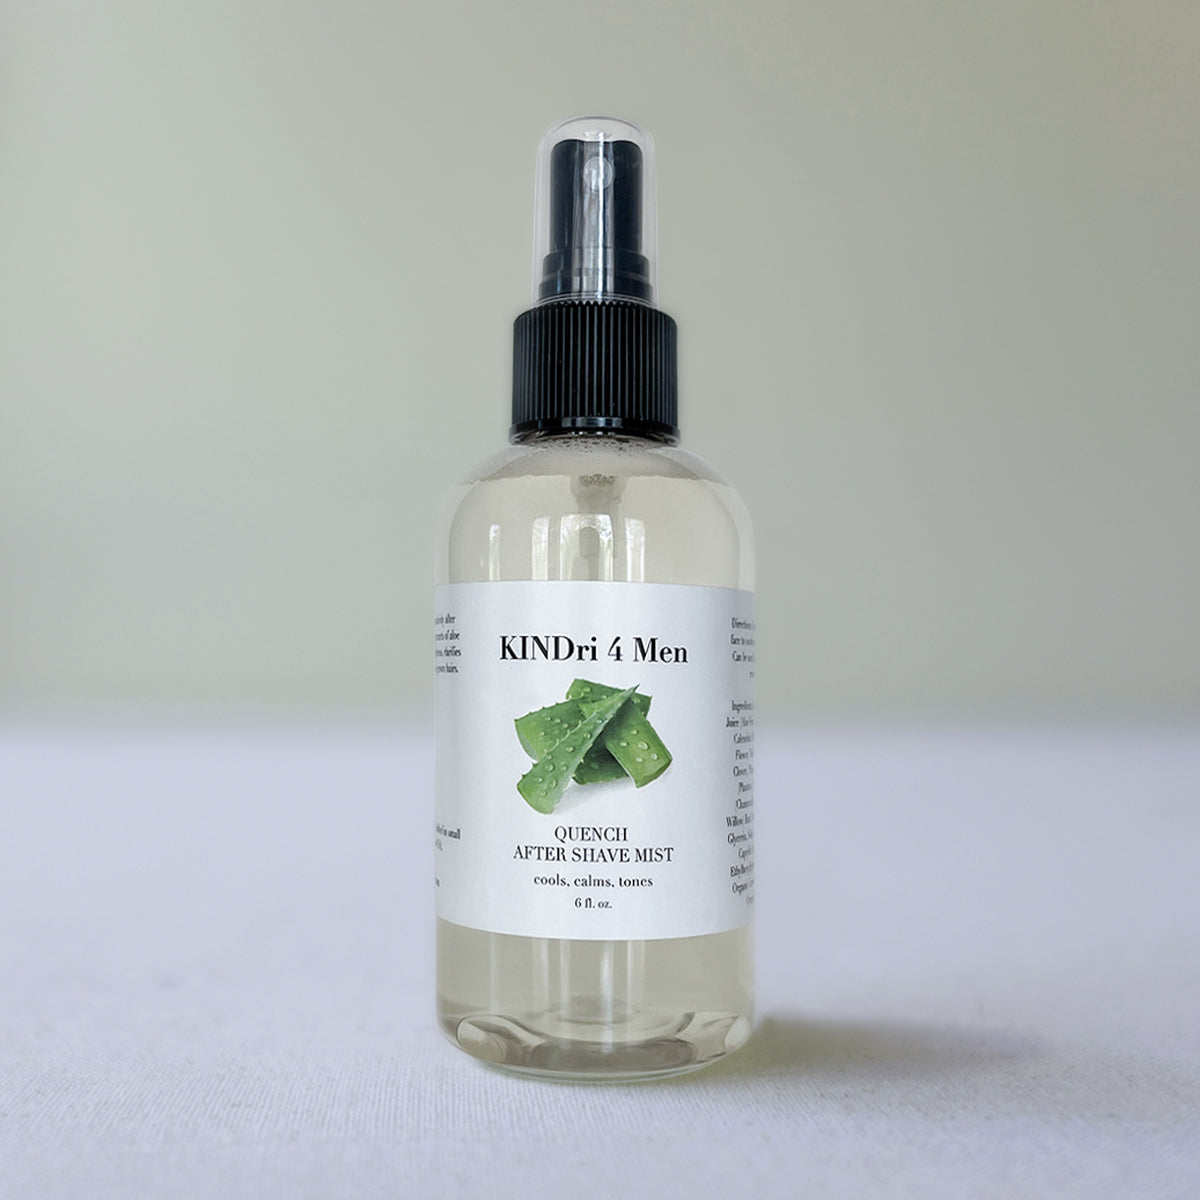 KINDri 4 Men quench after shave mist